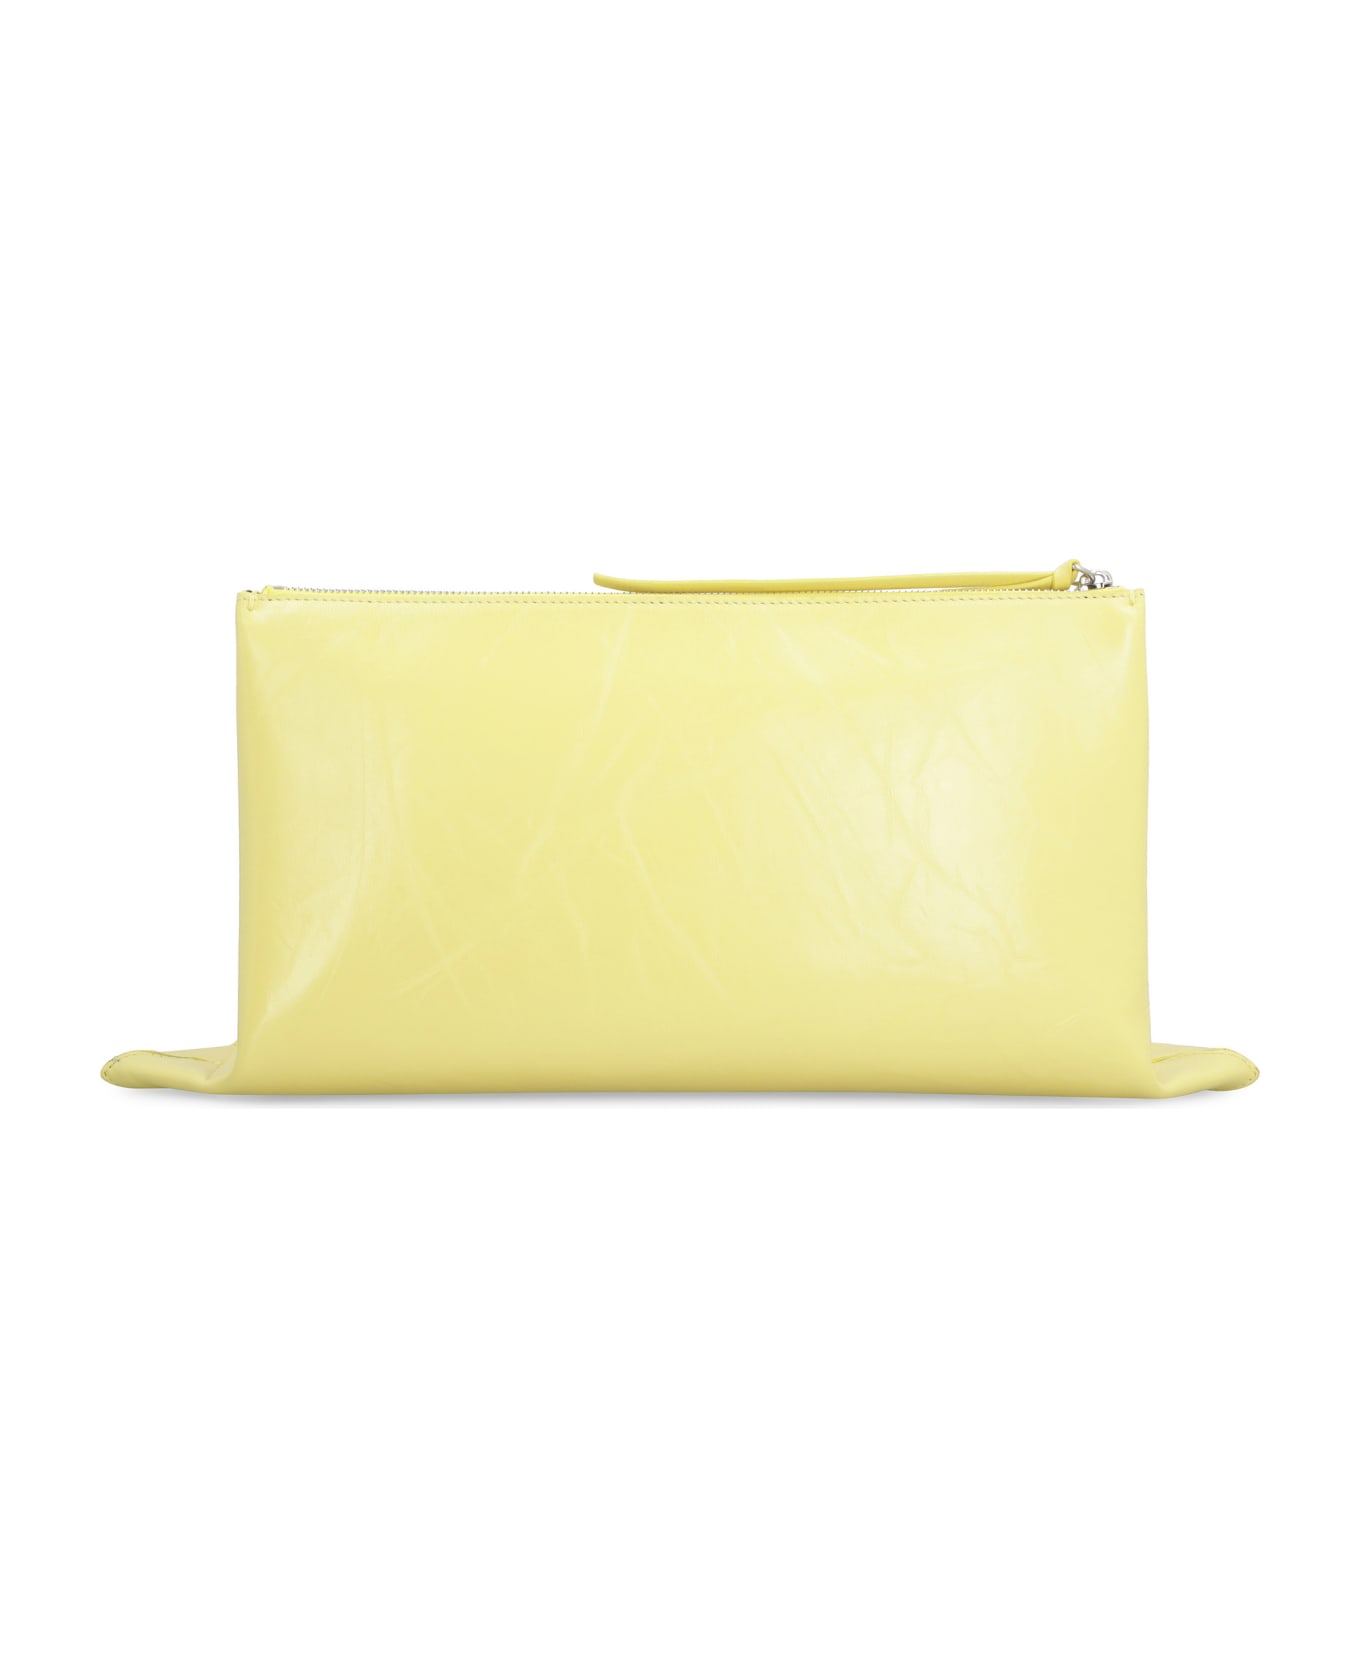 Jil Sander Leather Clutch - Yellow クラッチバッグ